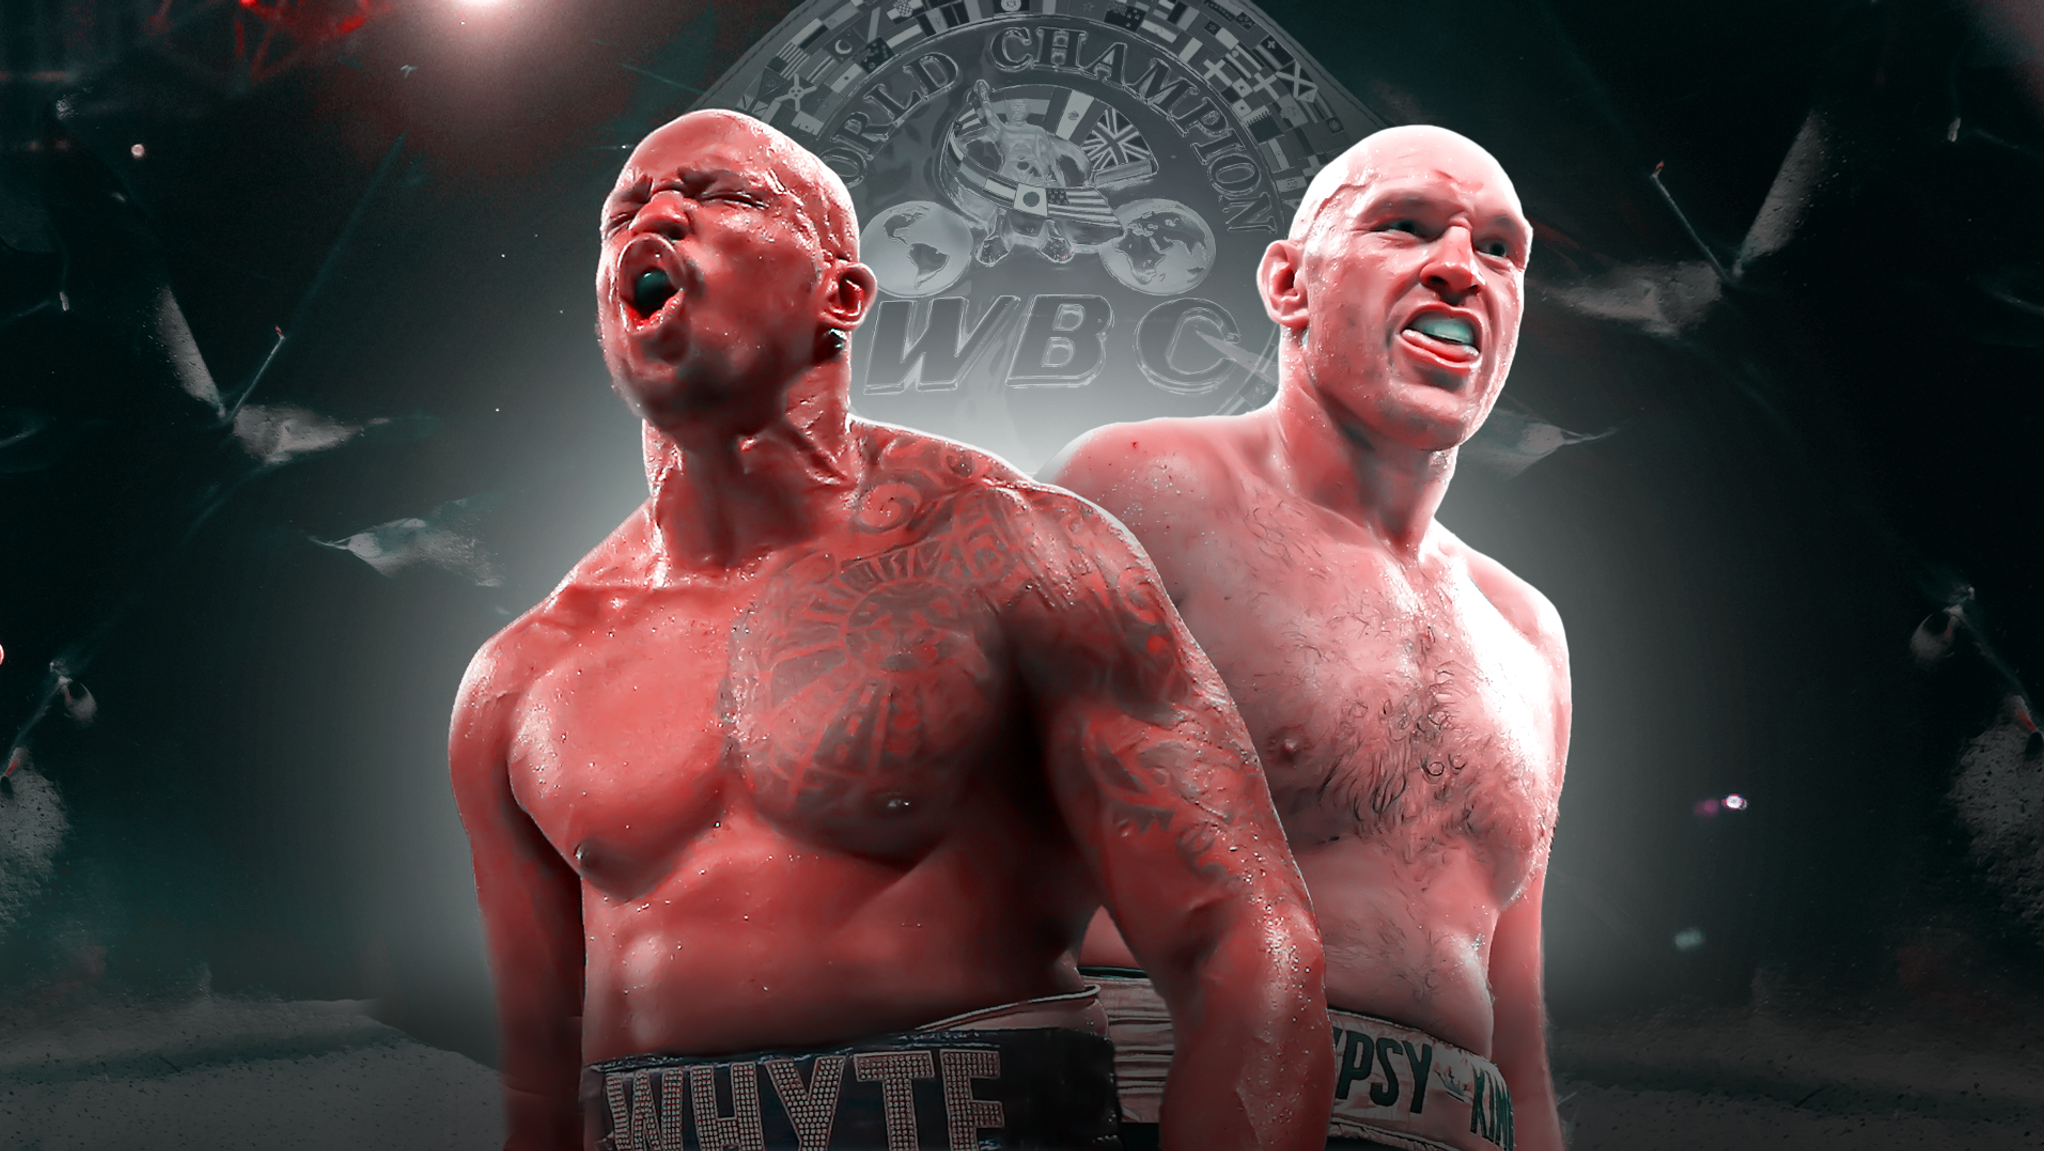 Fury Vs Whyte Tickets How To Buy And Information For Heavyweight Fight